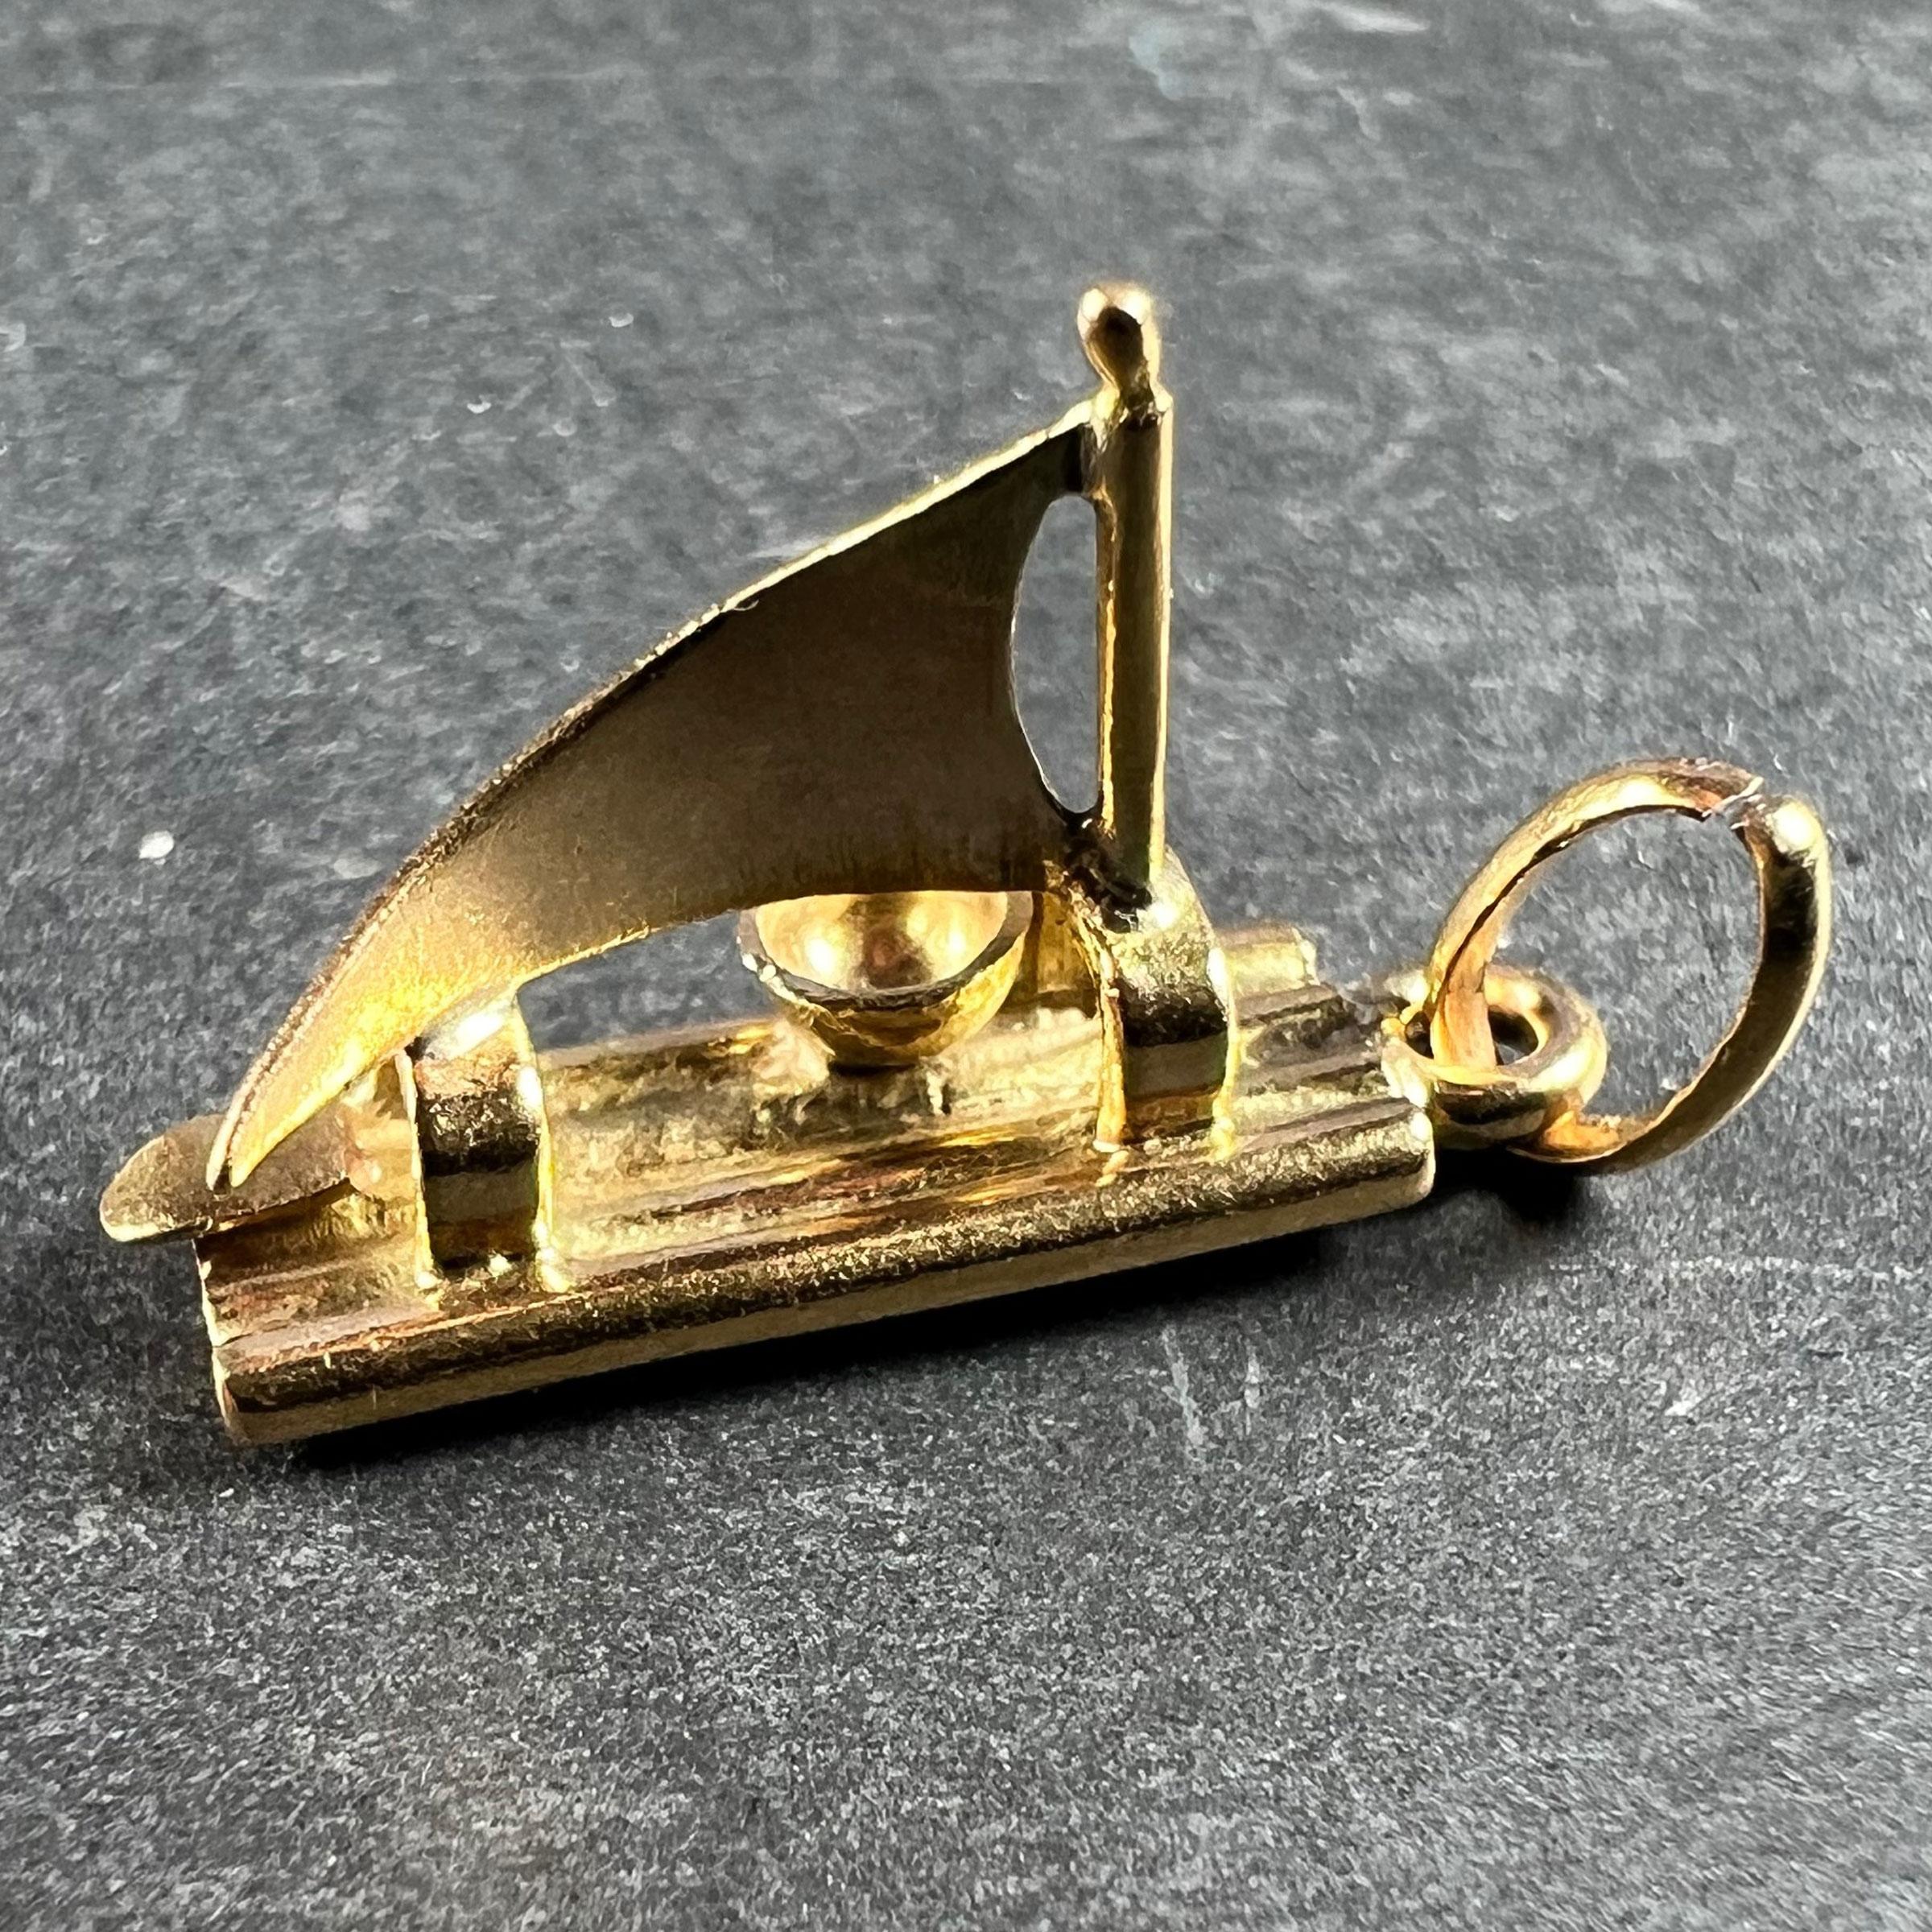 An 18 karat (18K) yellow gold charm pendant designed as a raft with a sail and rudder. Unmarked but tested for 18 karat gold. 

Dimensions: 1.8 x 0.55 x 1.1 cm
Weight: 1.78 grams
